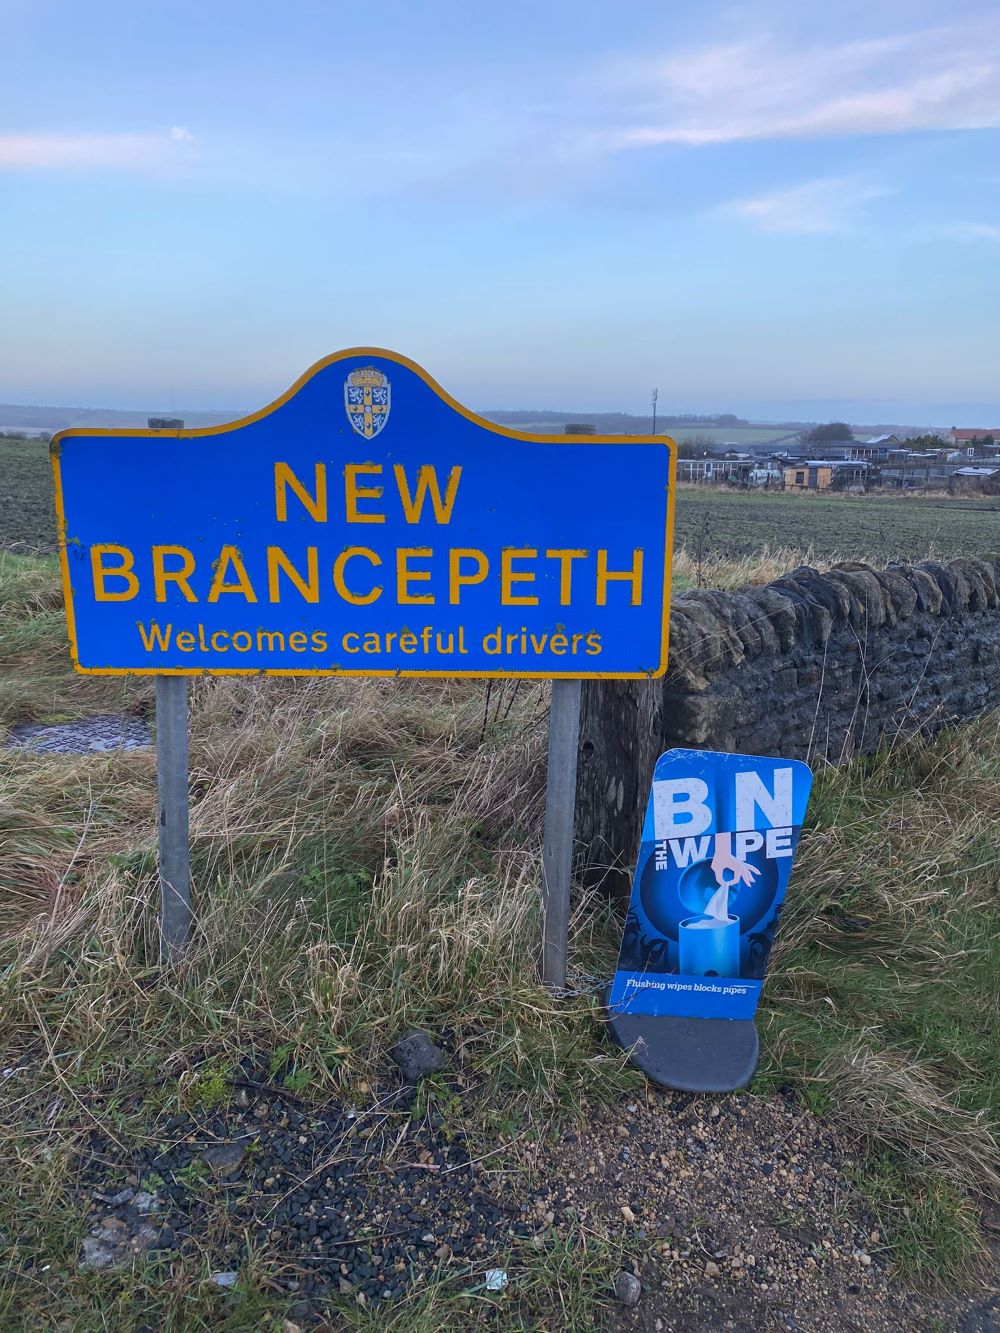 New Brancepeth sign with a Bin the Wipe sign